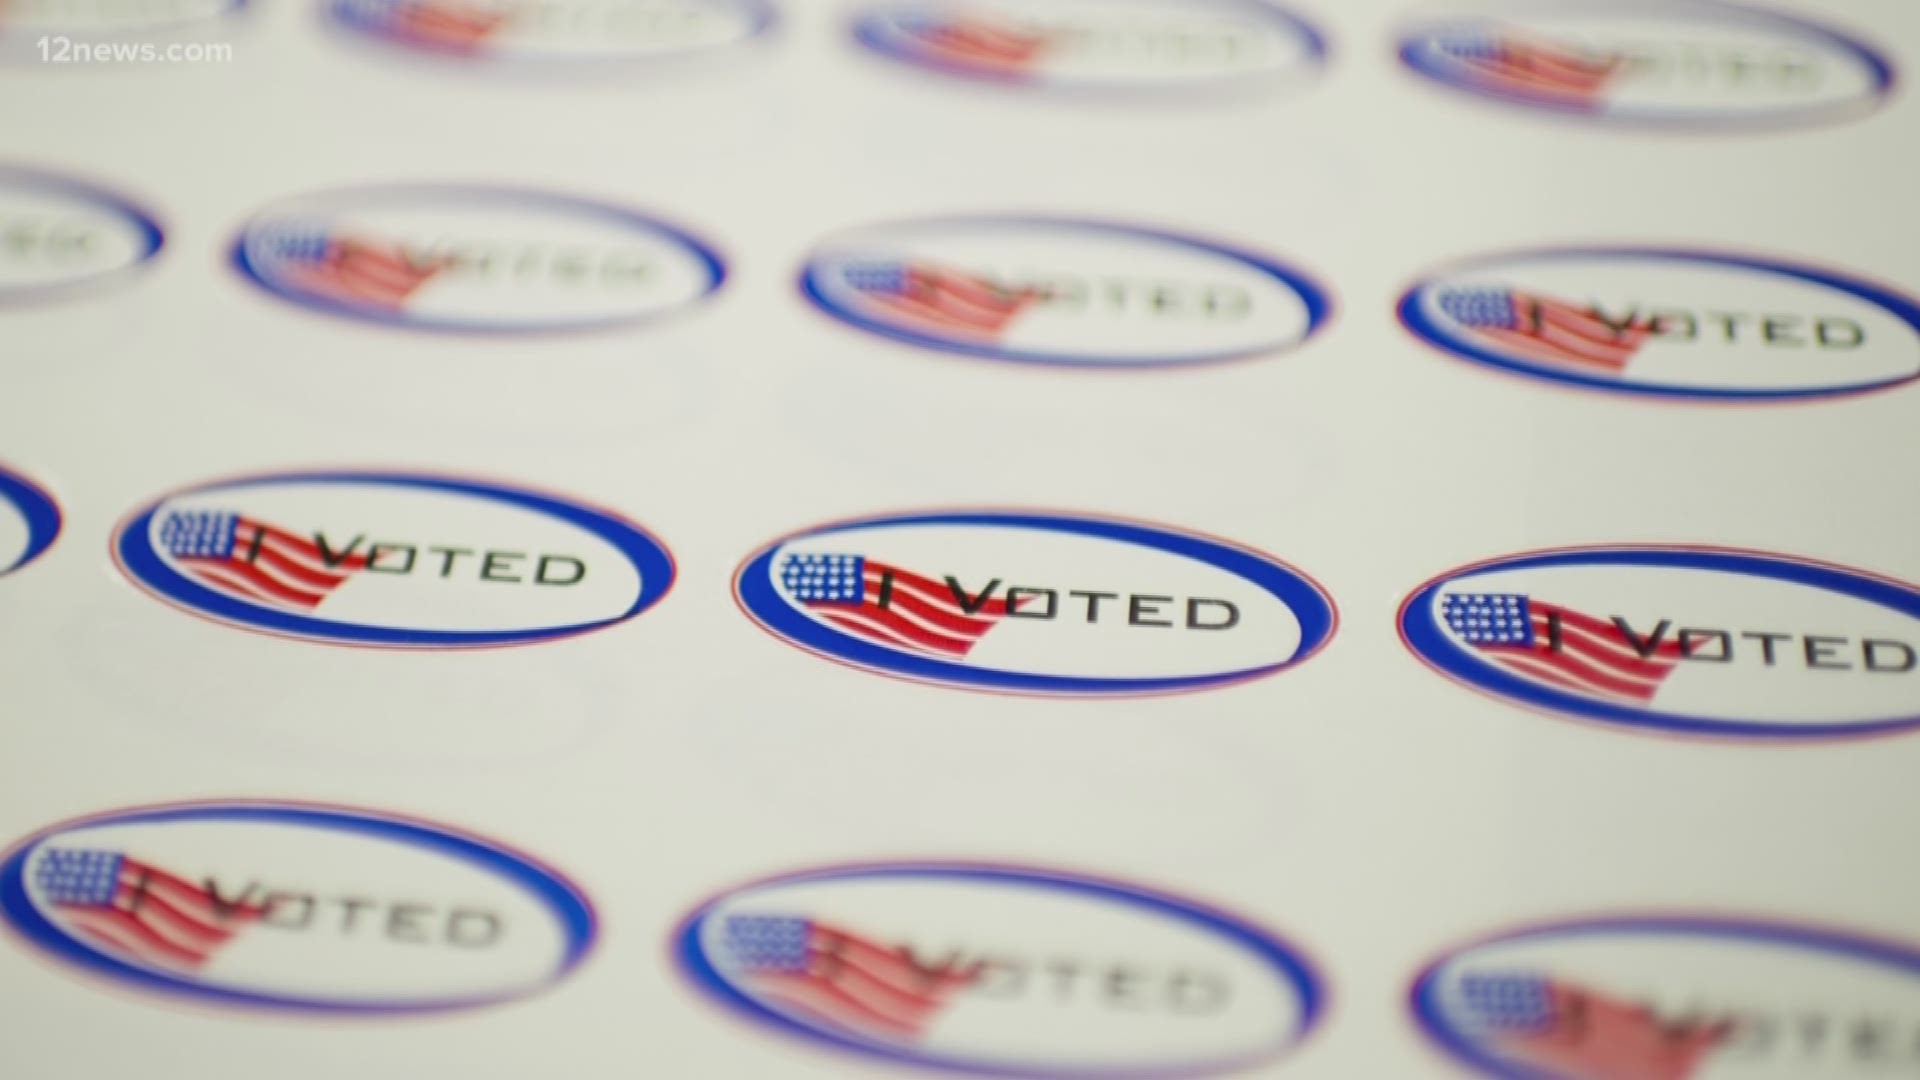 It's being said over and over that you NEED to vote in the mid-term election, but why? We verify eight reasons why you should vote in next month's election.